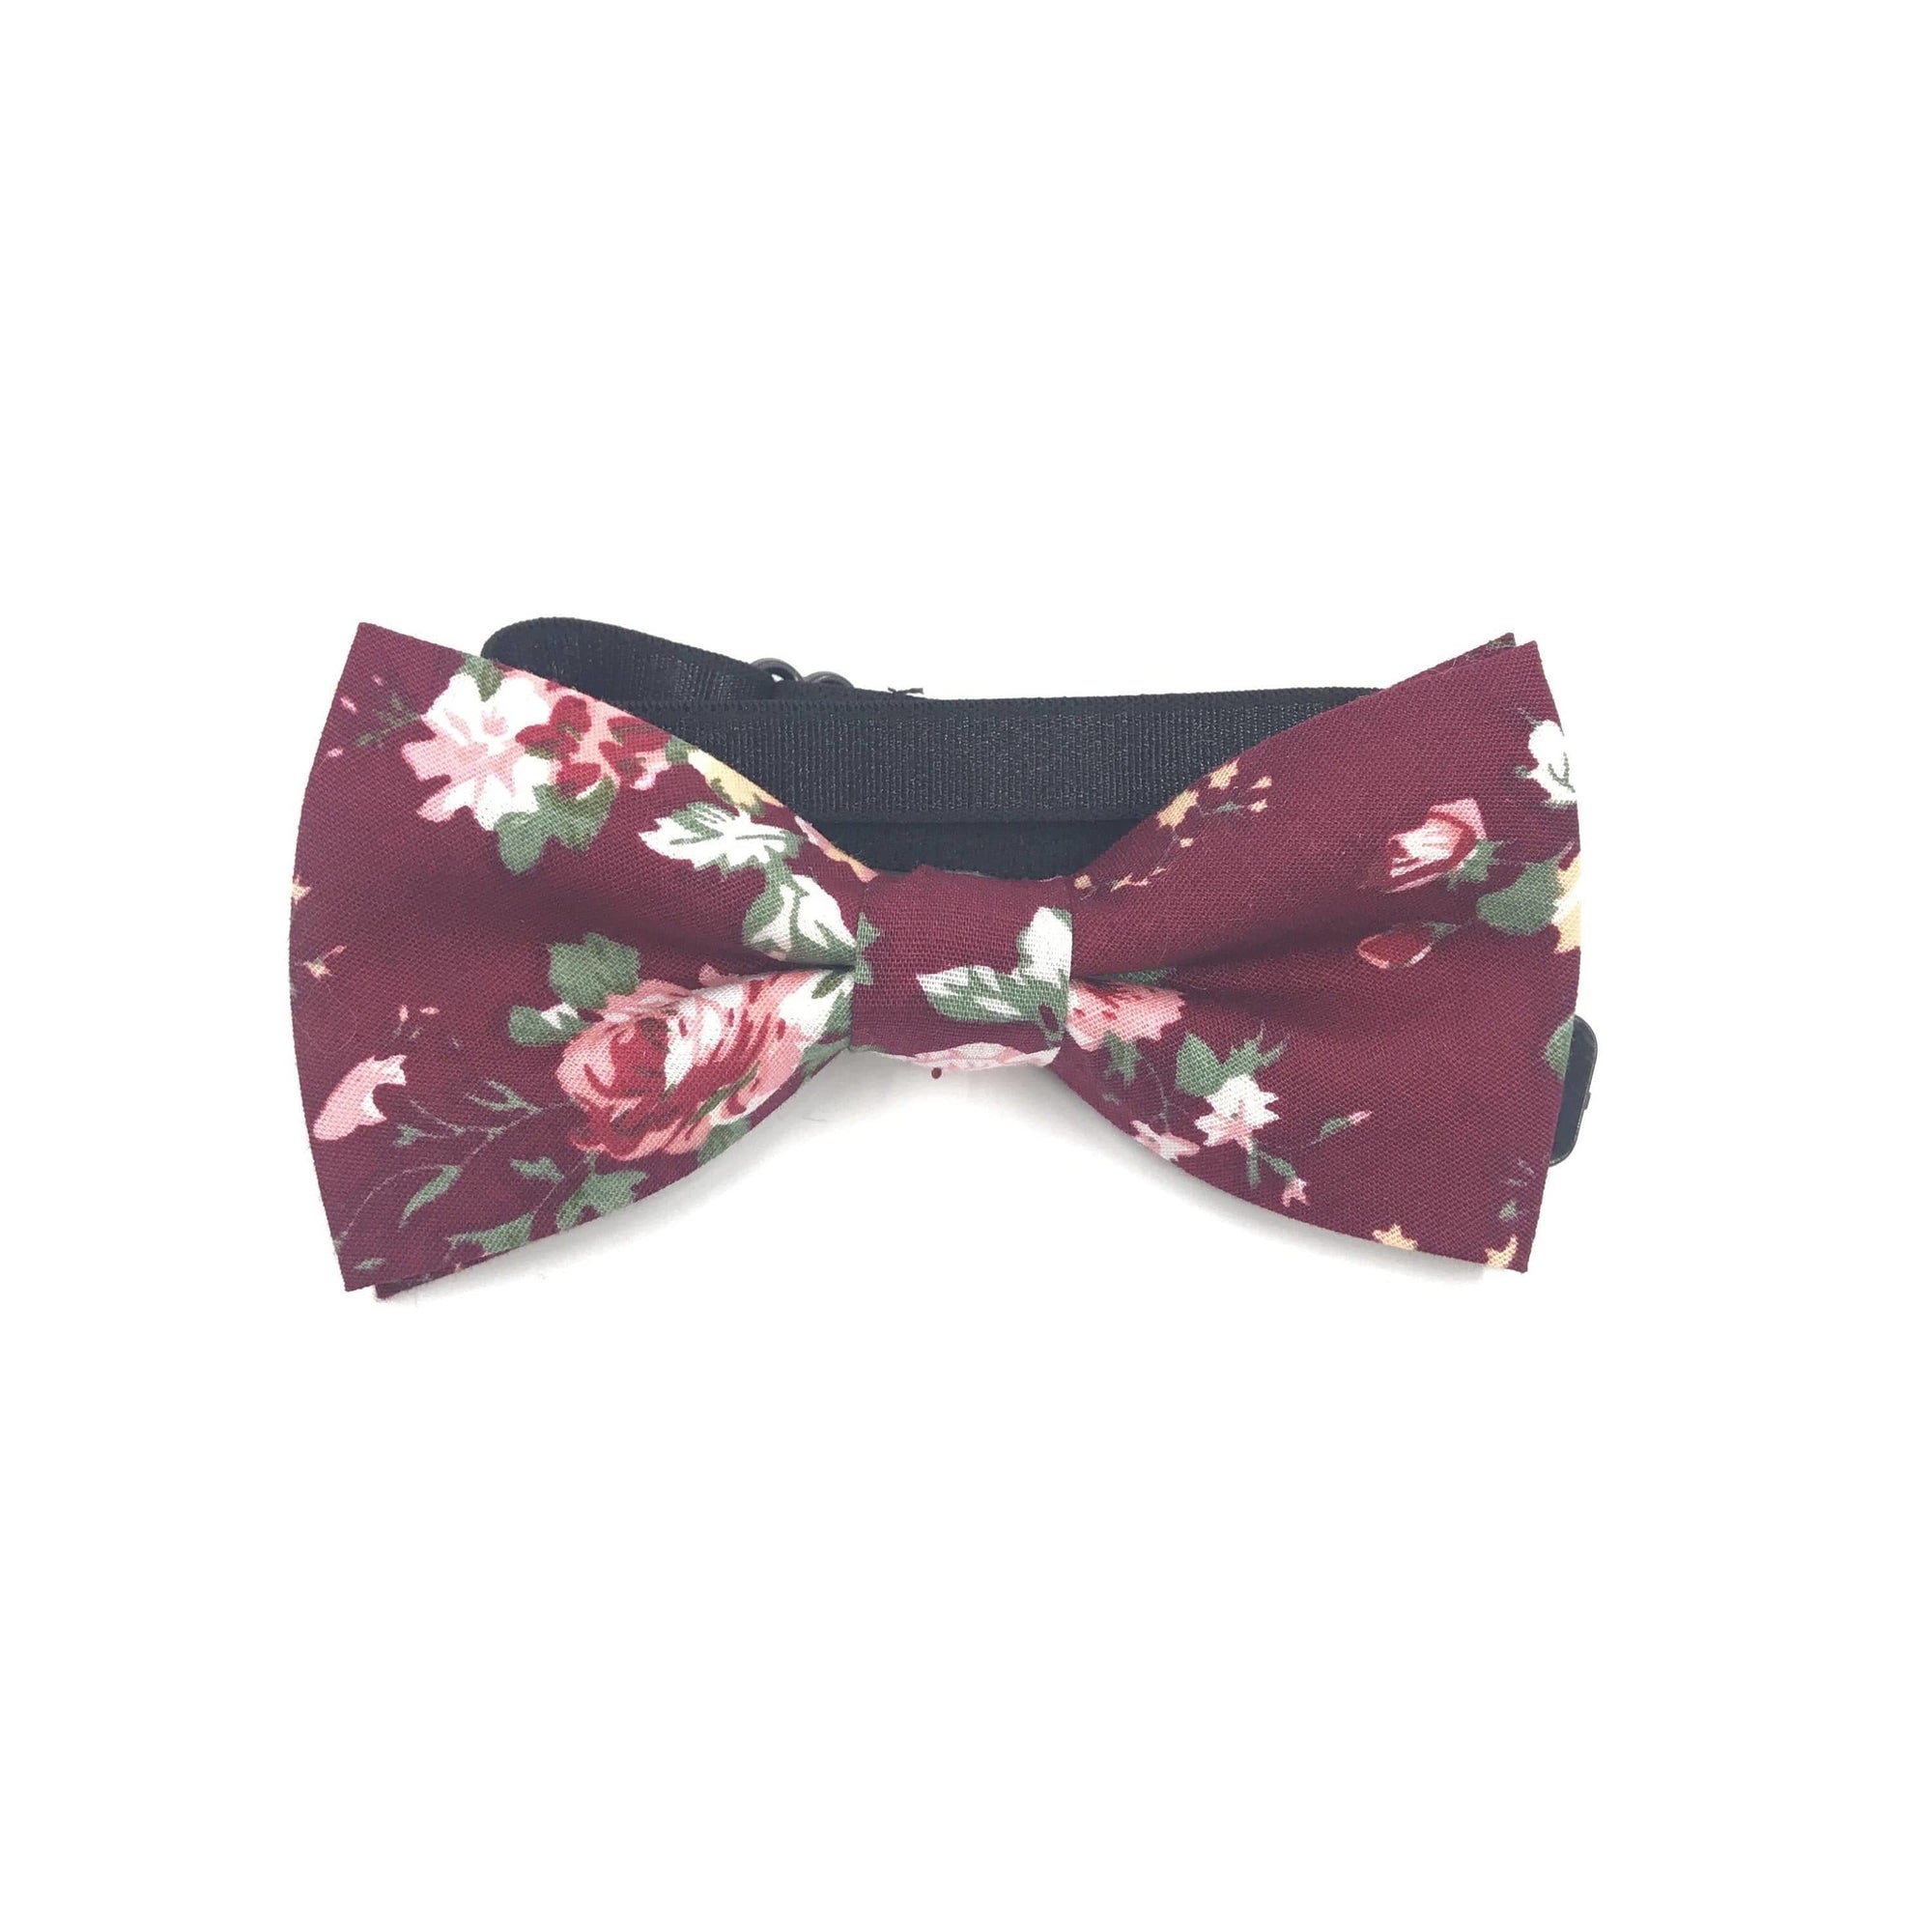 Kids Bow Tie Floral Pre-Tied Bow Tie WESLEY- MYTIESHOP-Floral Kid&#39;s bow tie - Wesley Strap is adjustablePre-Tied bowtieBow Tie 10.5 * 6CM Color: Burgundy Your little gentleman will look dapper in this burgundy floral bow tie. This pre-tied bow tie comes in a range of sizes to fit your child perfectly. The vibrant flowers against the dark background make this tie a stand-out piece. Add this bow tie to your child&#39;s wardrobe for a special occasions or even just to add a touch of refinement to their